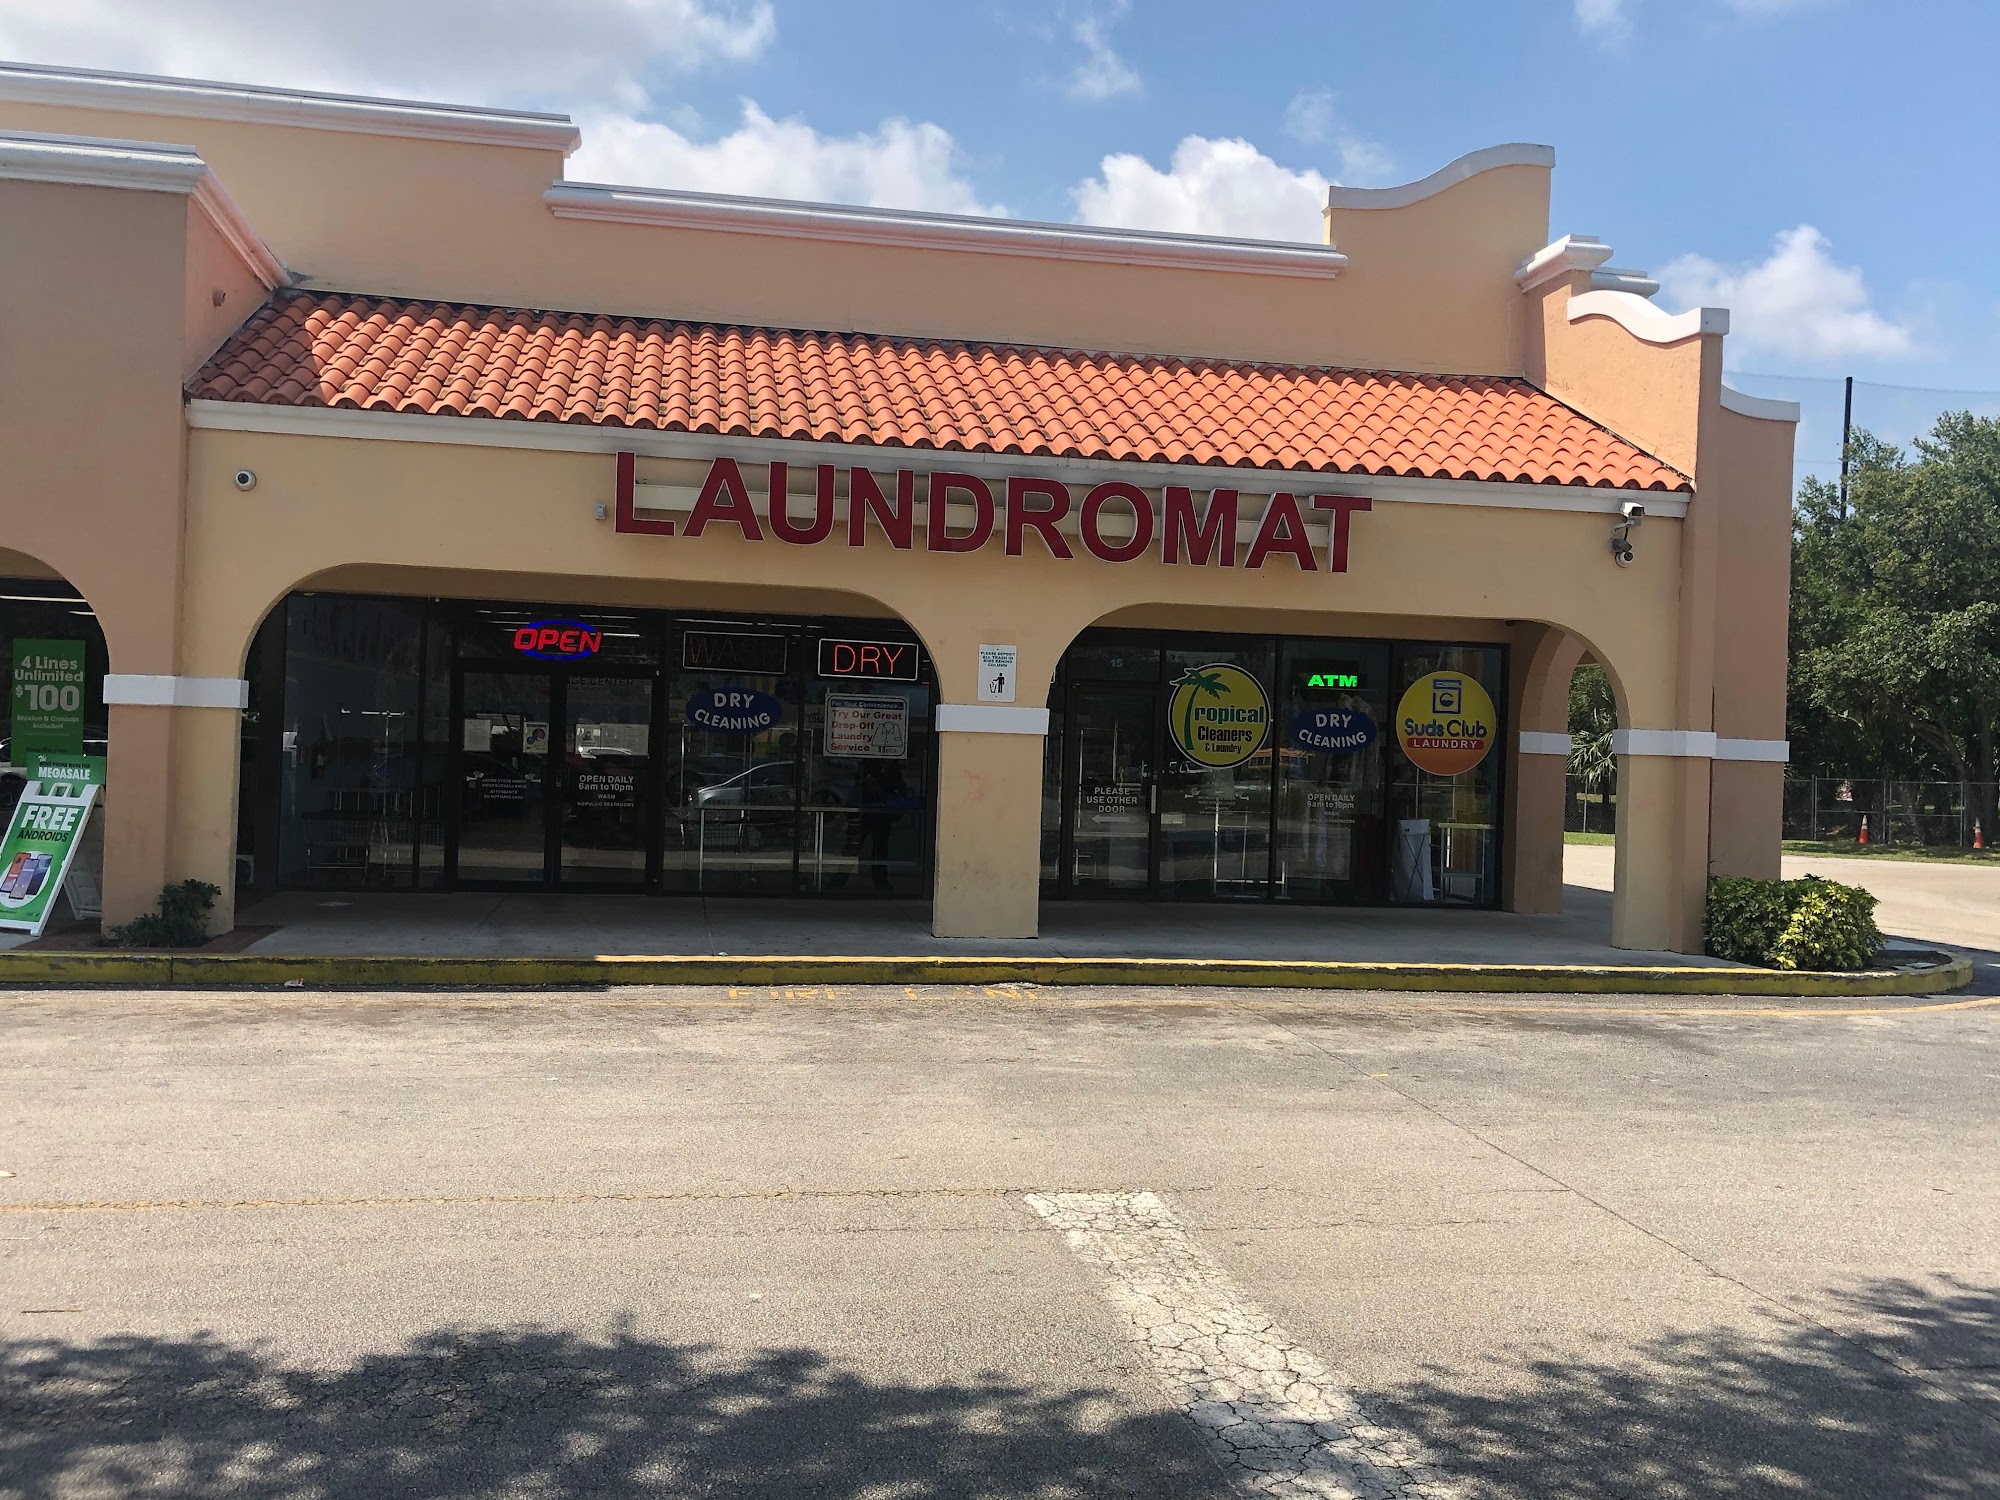 Suds Club Laundromat + Dry Cleaners